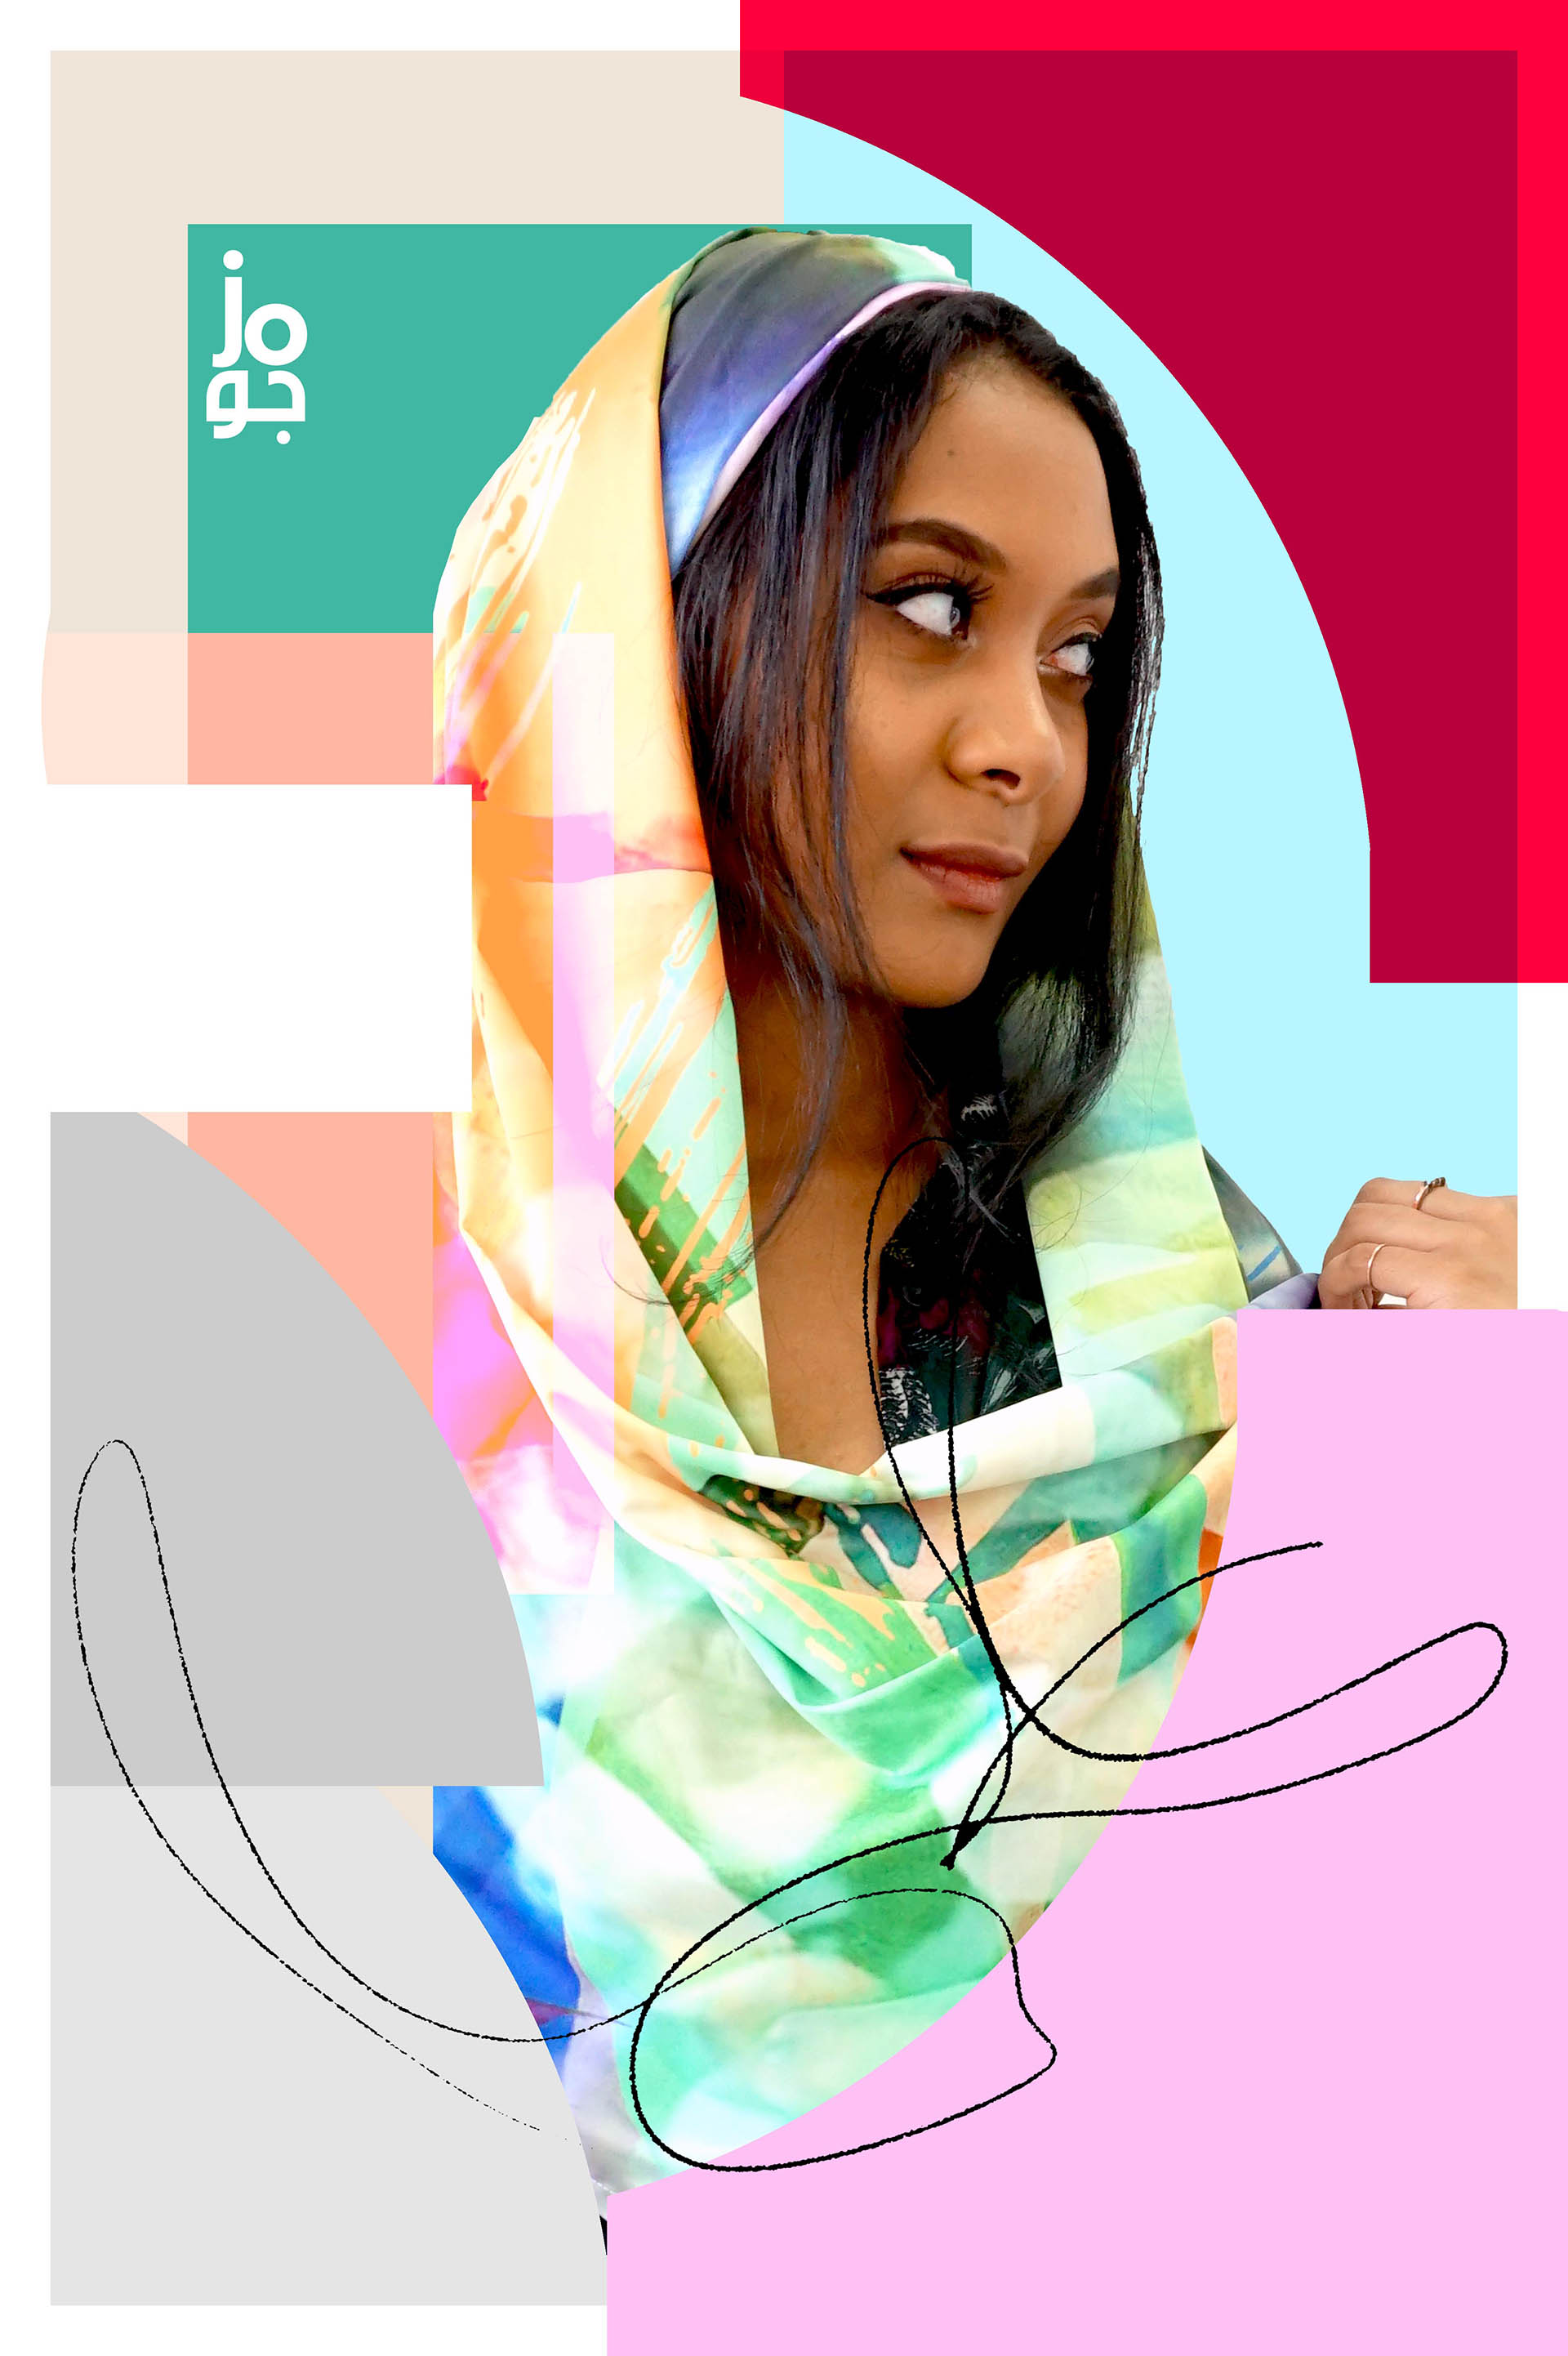 Promotional poster for Jo head scarves/hijabs